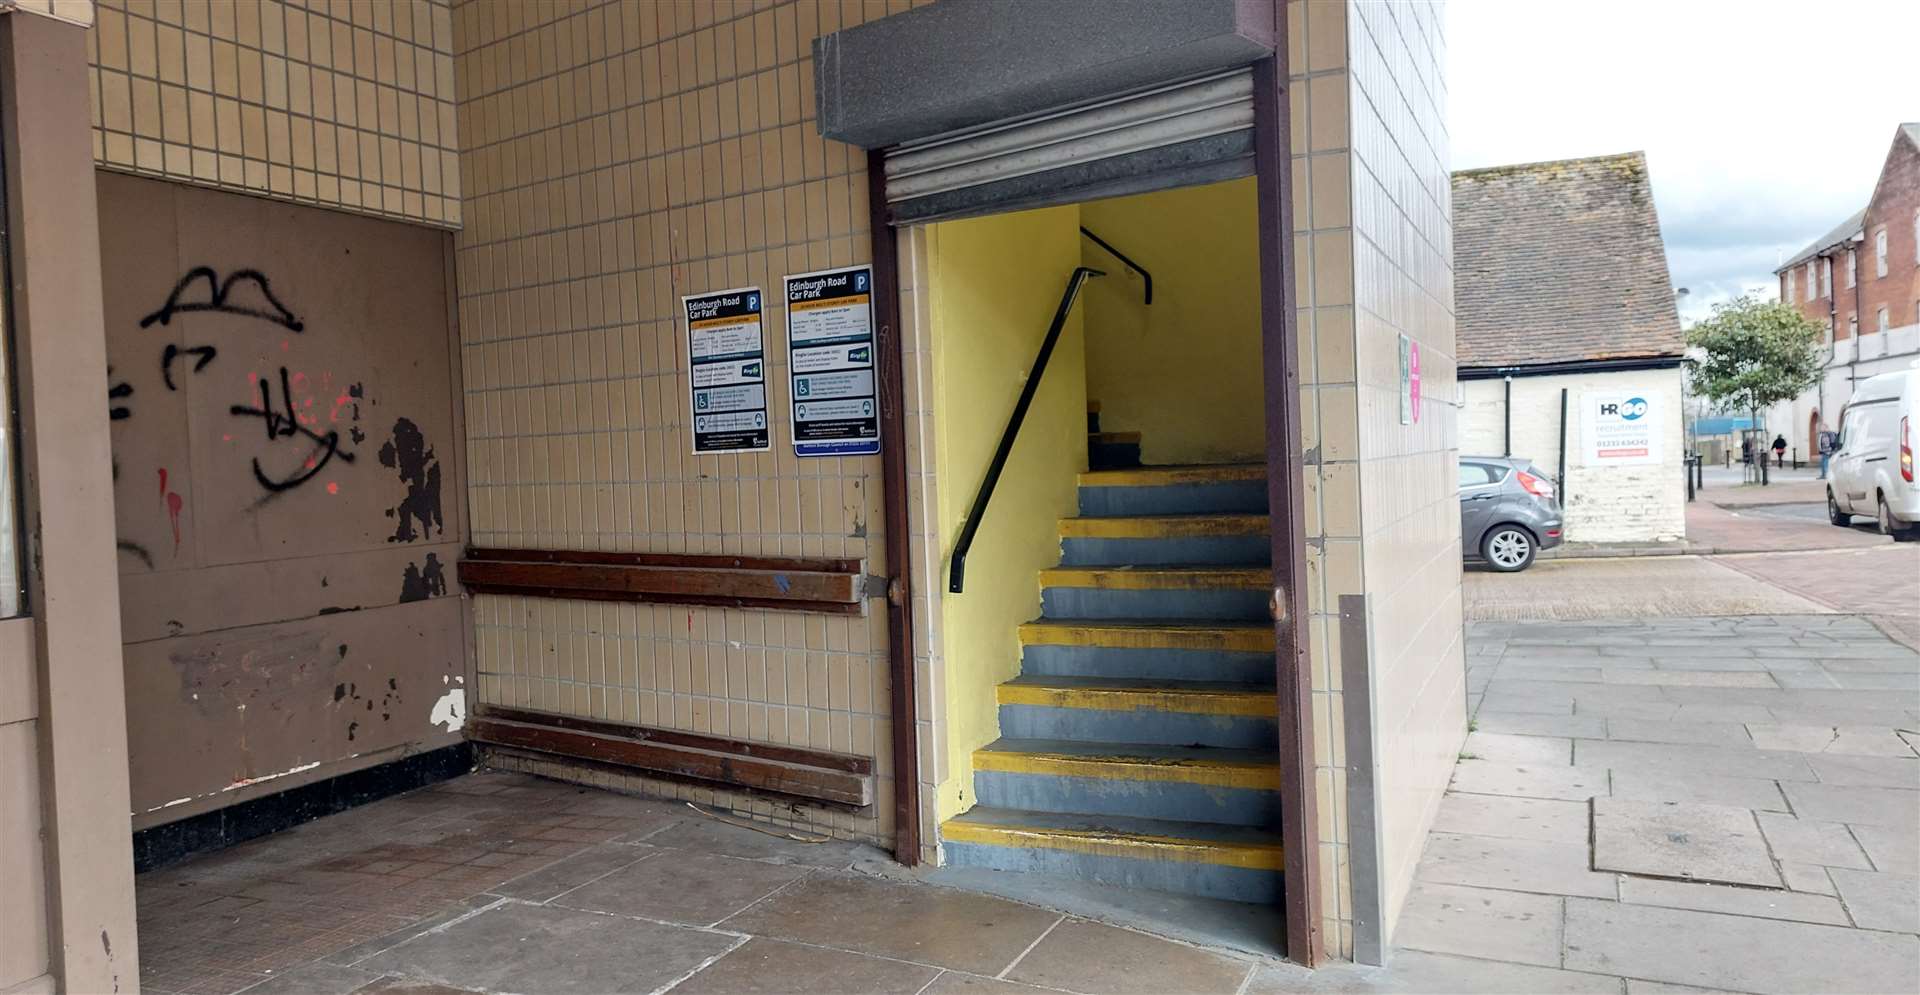 The stairwell in the Edinburgh Road car park is blighted by crime